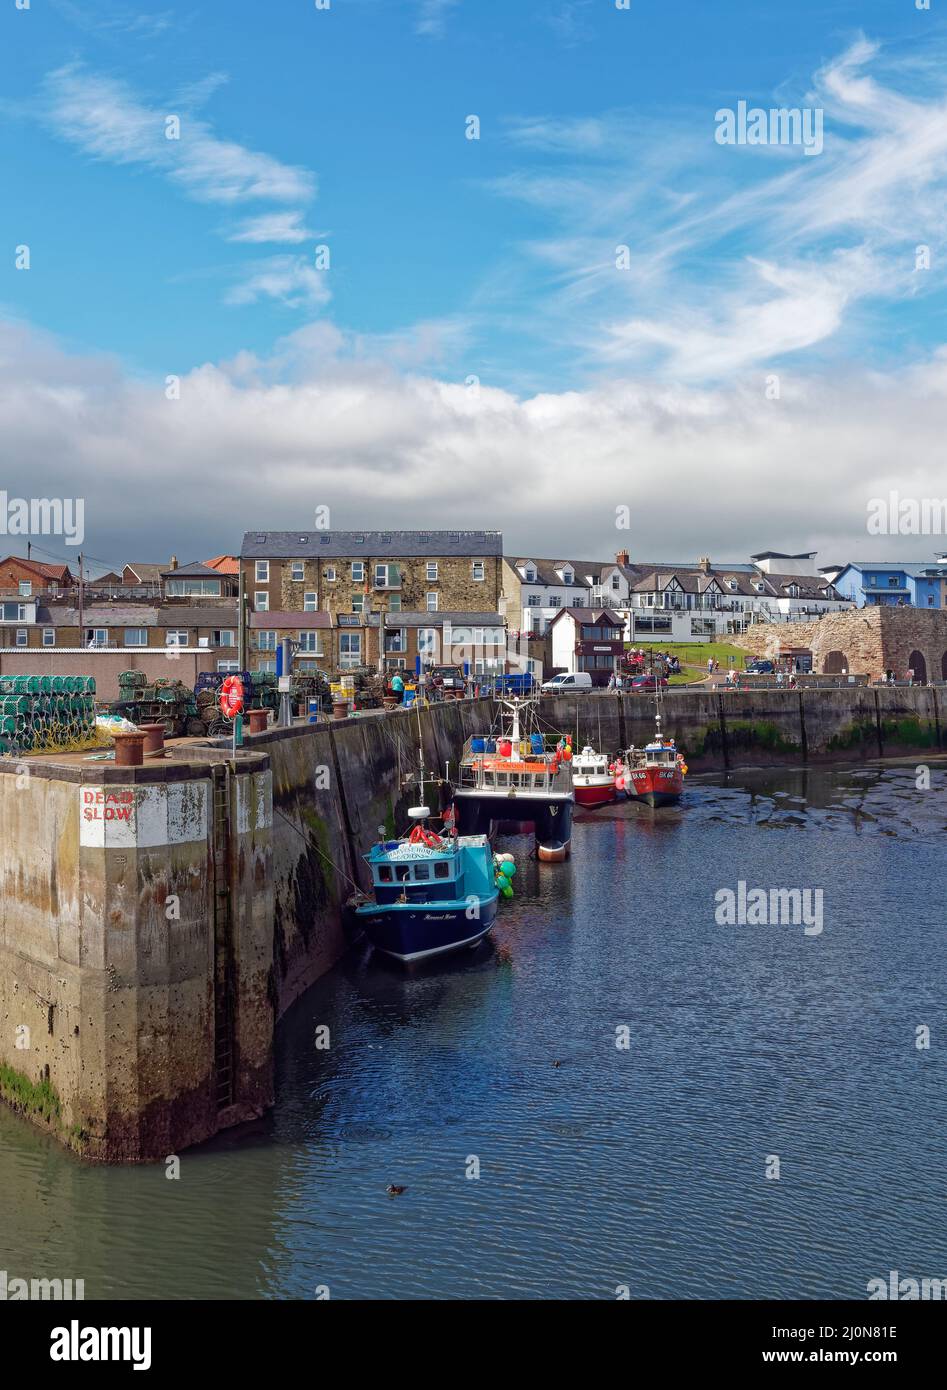 Seahouses  Harbour at Low Tide, with Boats resting on the silty bottom of the Harbour, overlooked by Houses and Commercial Buildings. Stock Photo